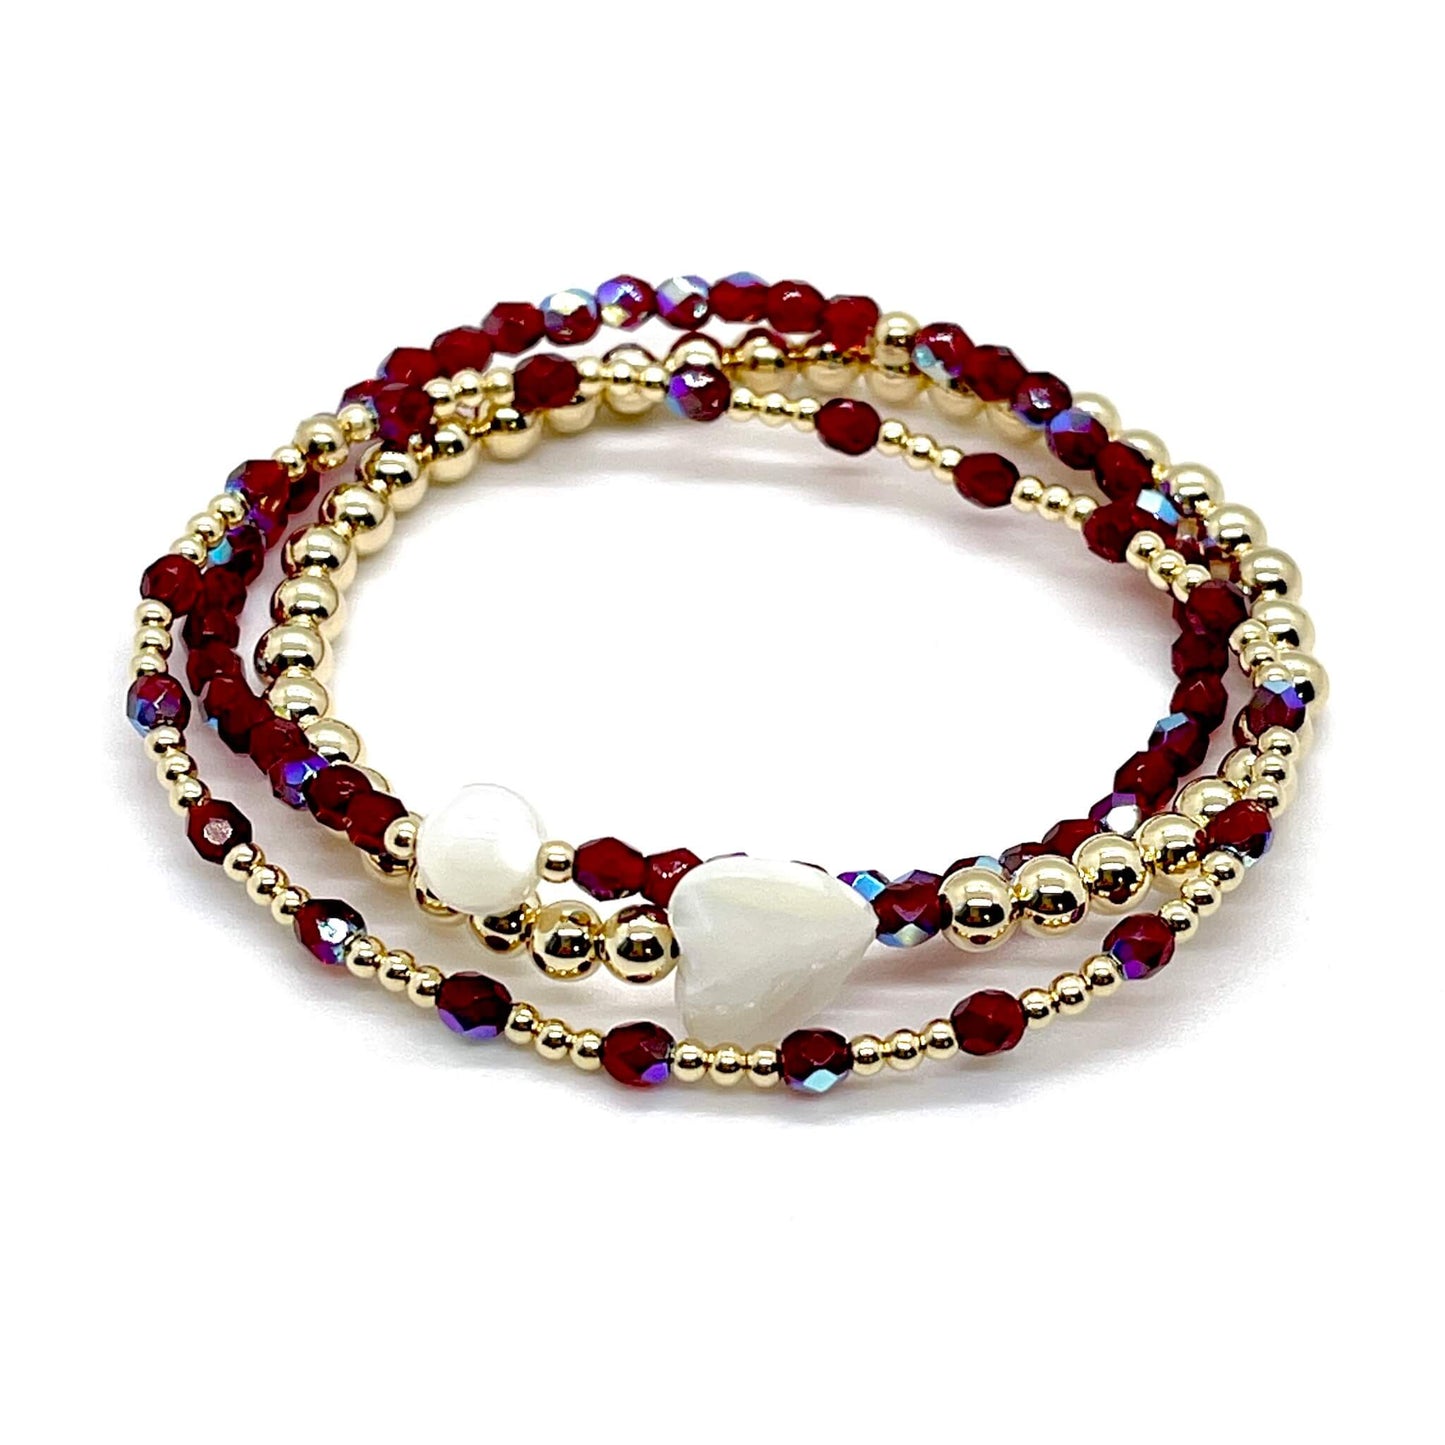 Bridesmaid bracelet gift. Garnet red crystals and 14K gold filled beads with mother-of-pearl round and heart shaped accent beads.